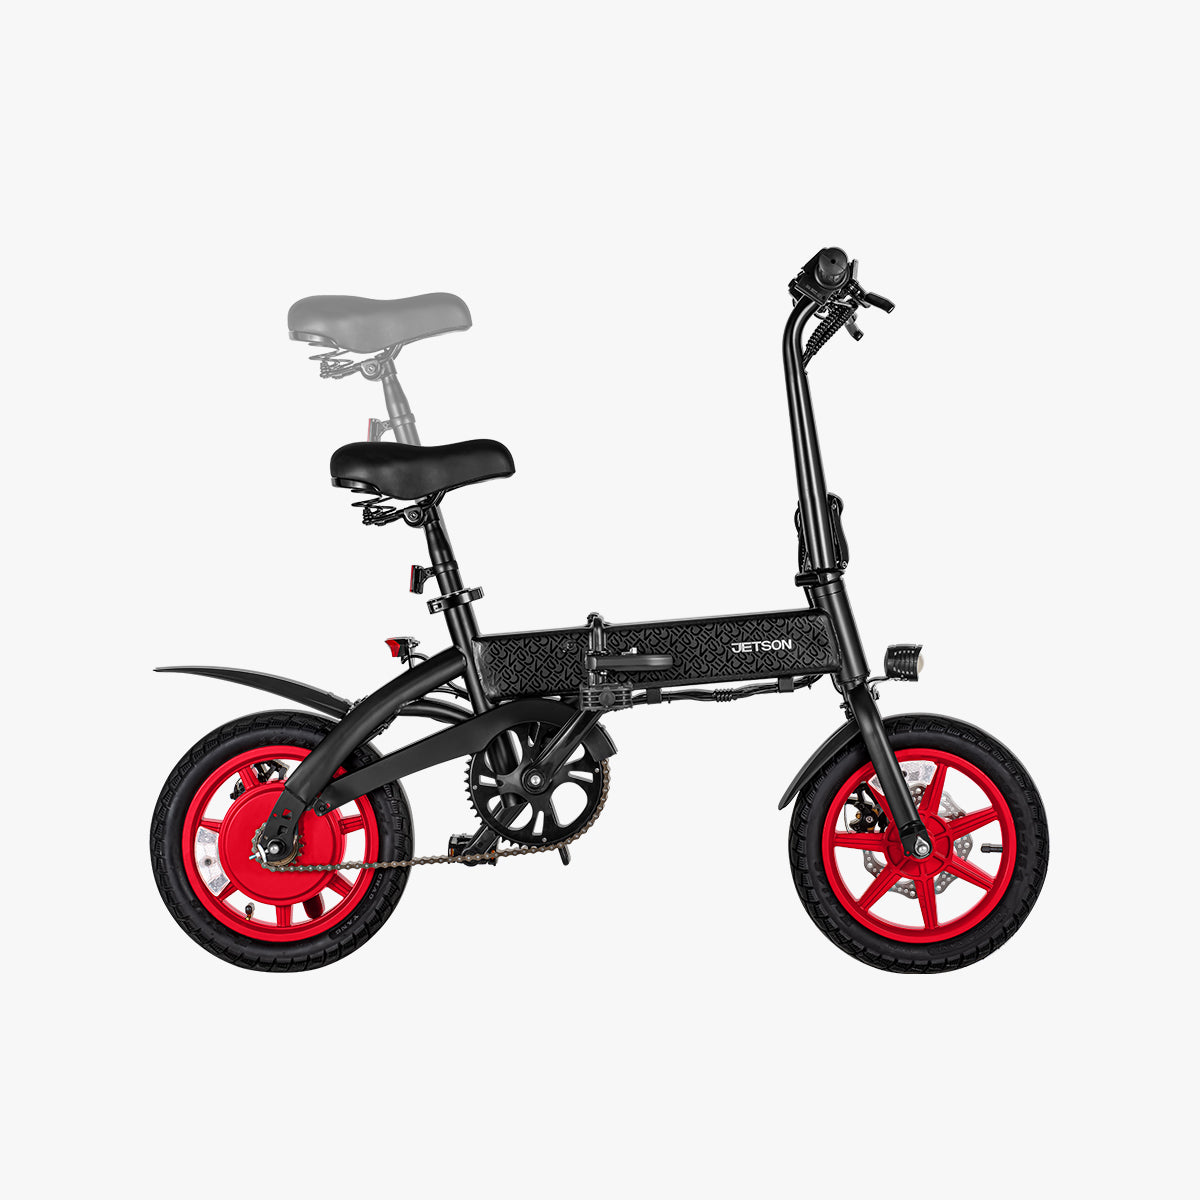 a side profile view of the Arro electric bike with a demonstration of how the seat can be adjusted by showing it at two different heights